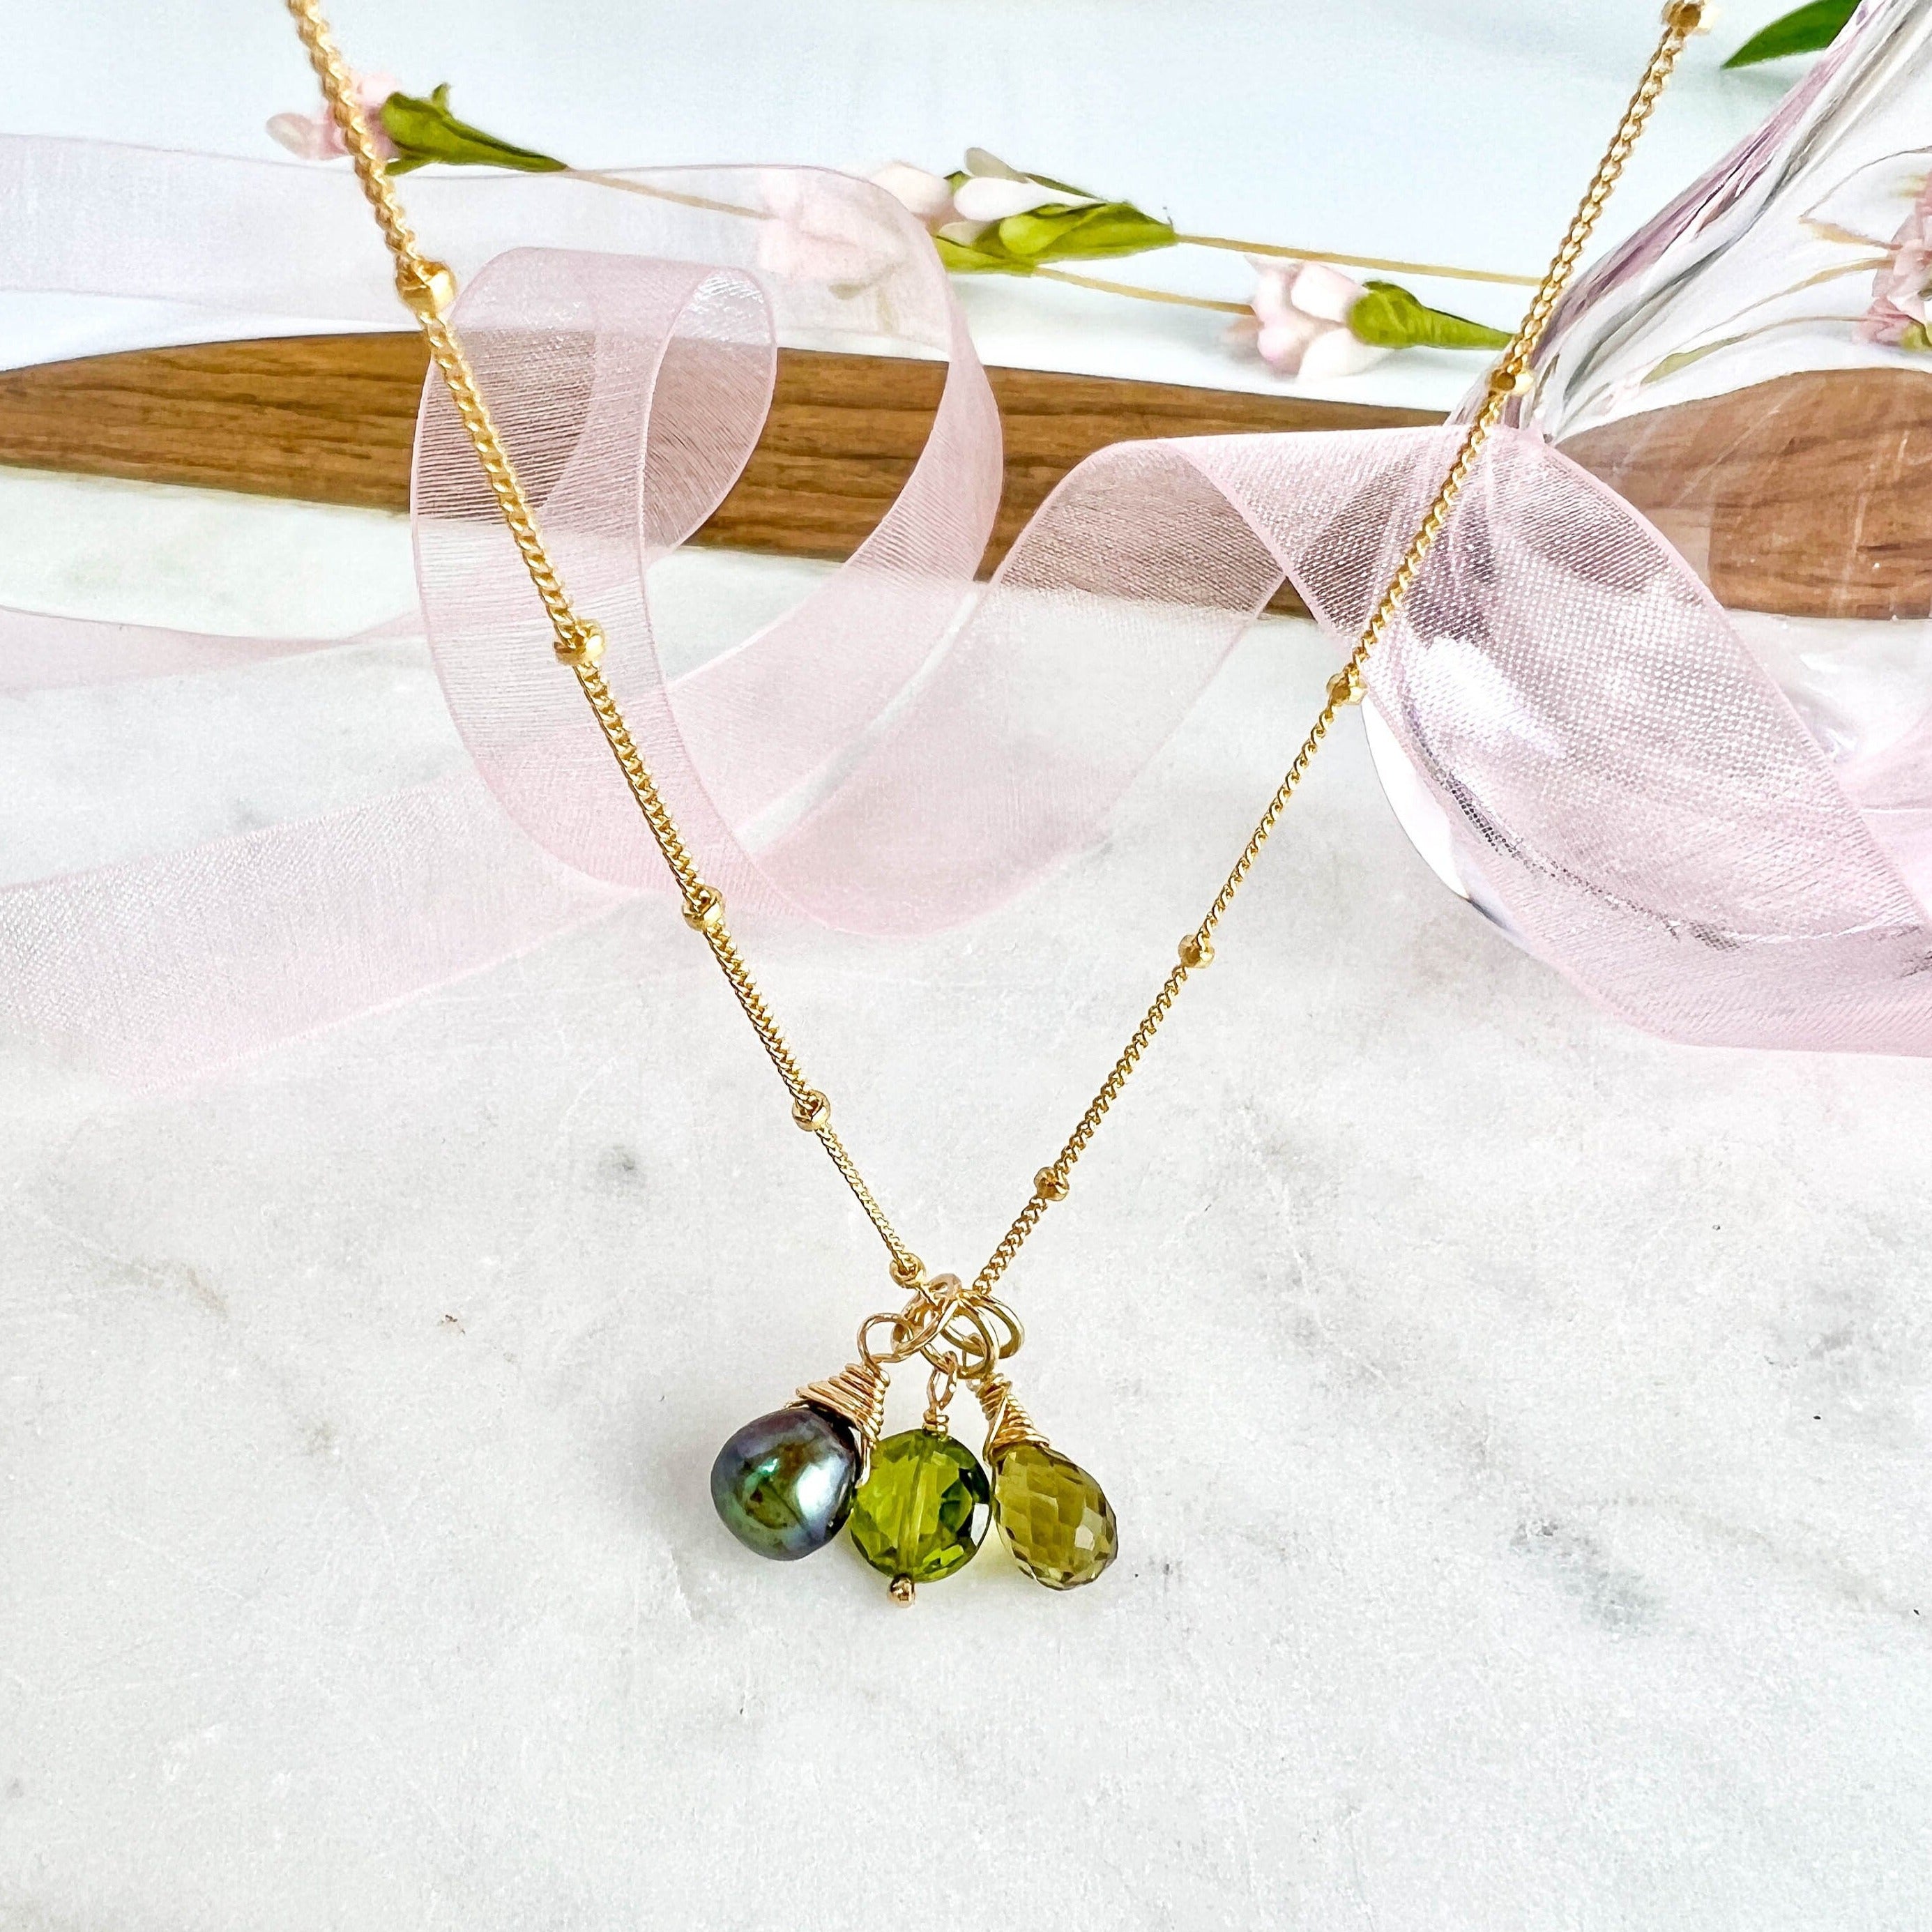 Buy 925 Sterling Silver Pearl and Peridot Jewelry Necklace on Sale, High  Quality Peridot Beaded and Free Size Pearl Necklace Traditional Jewelry  Online in India - Etsy